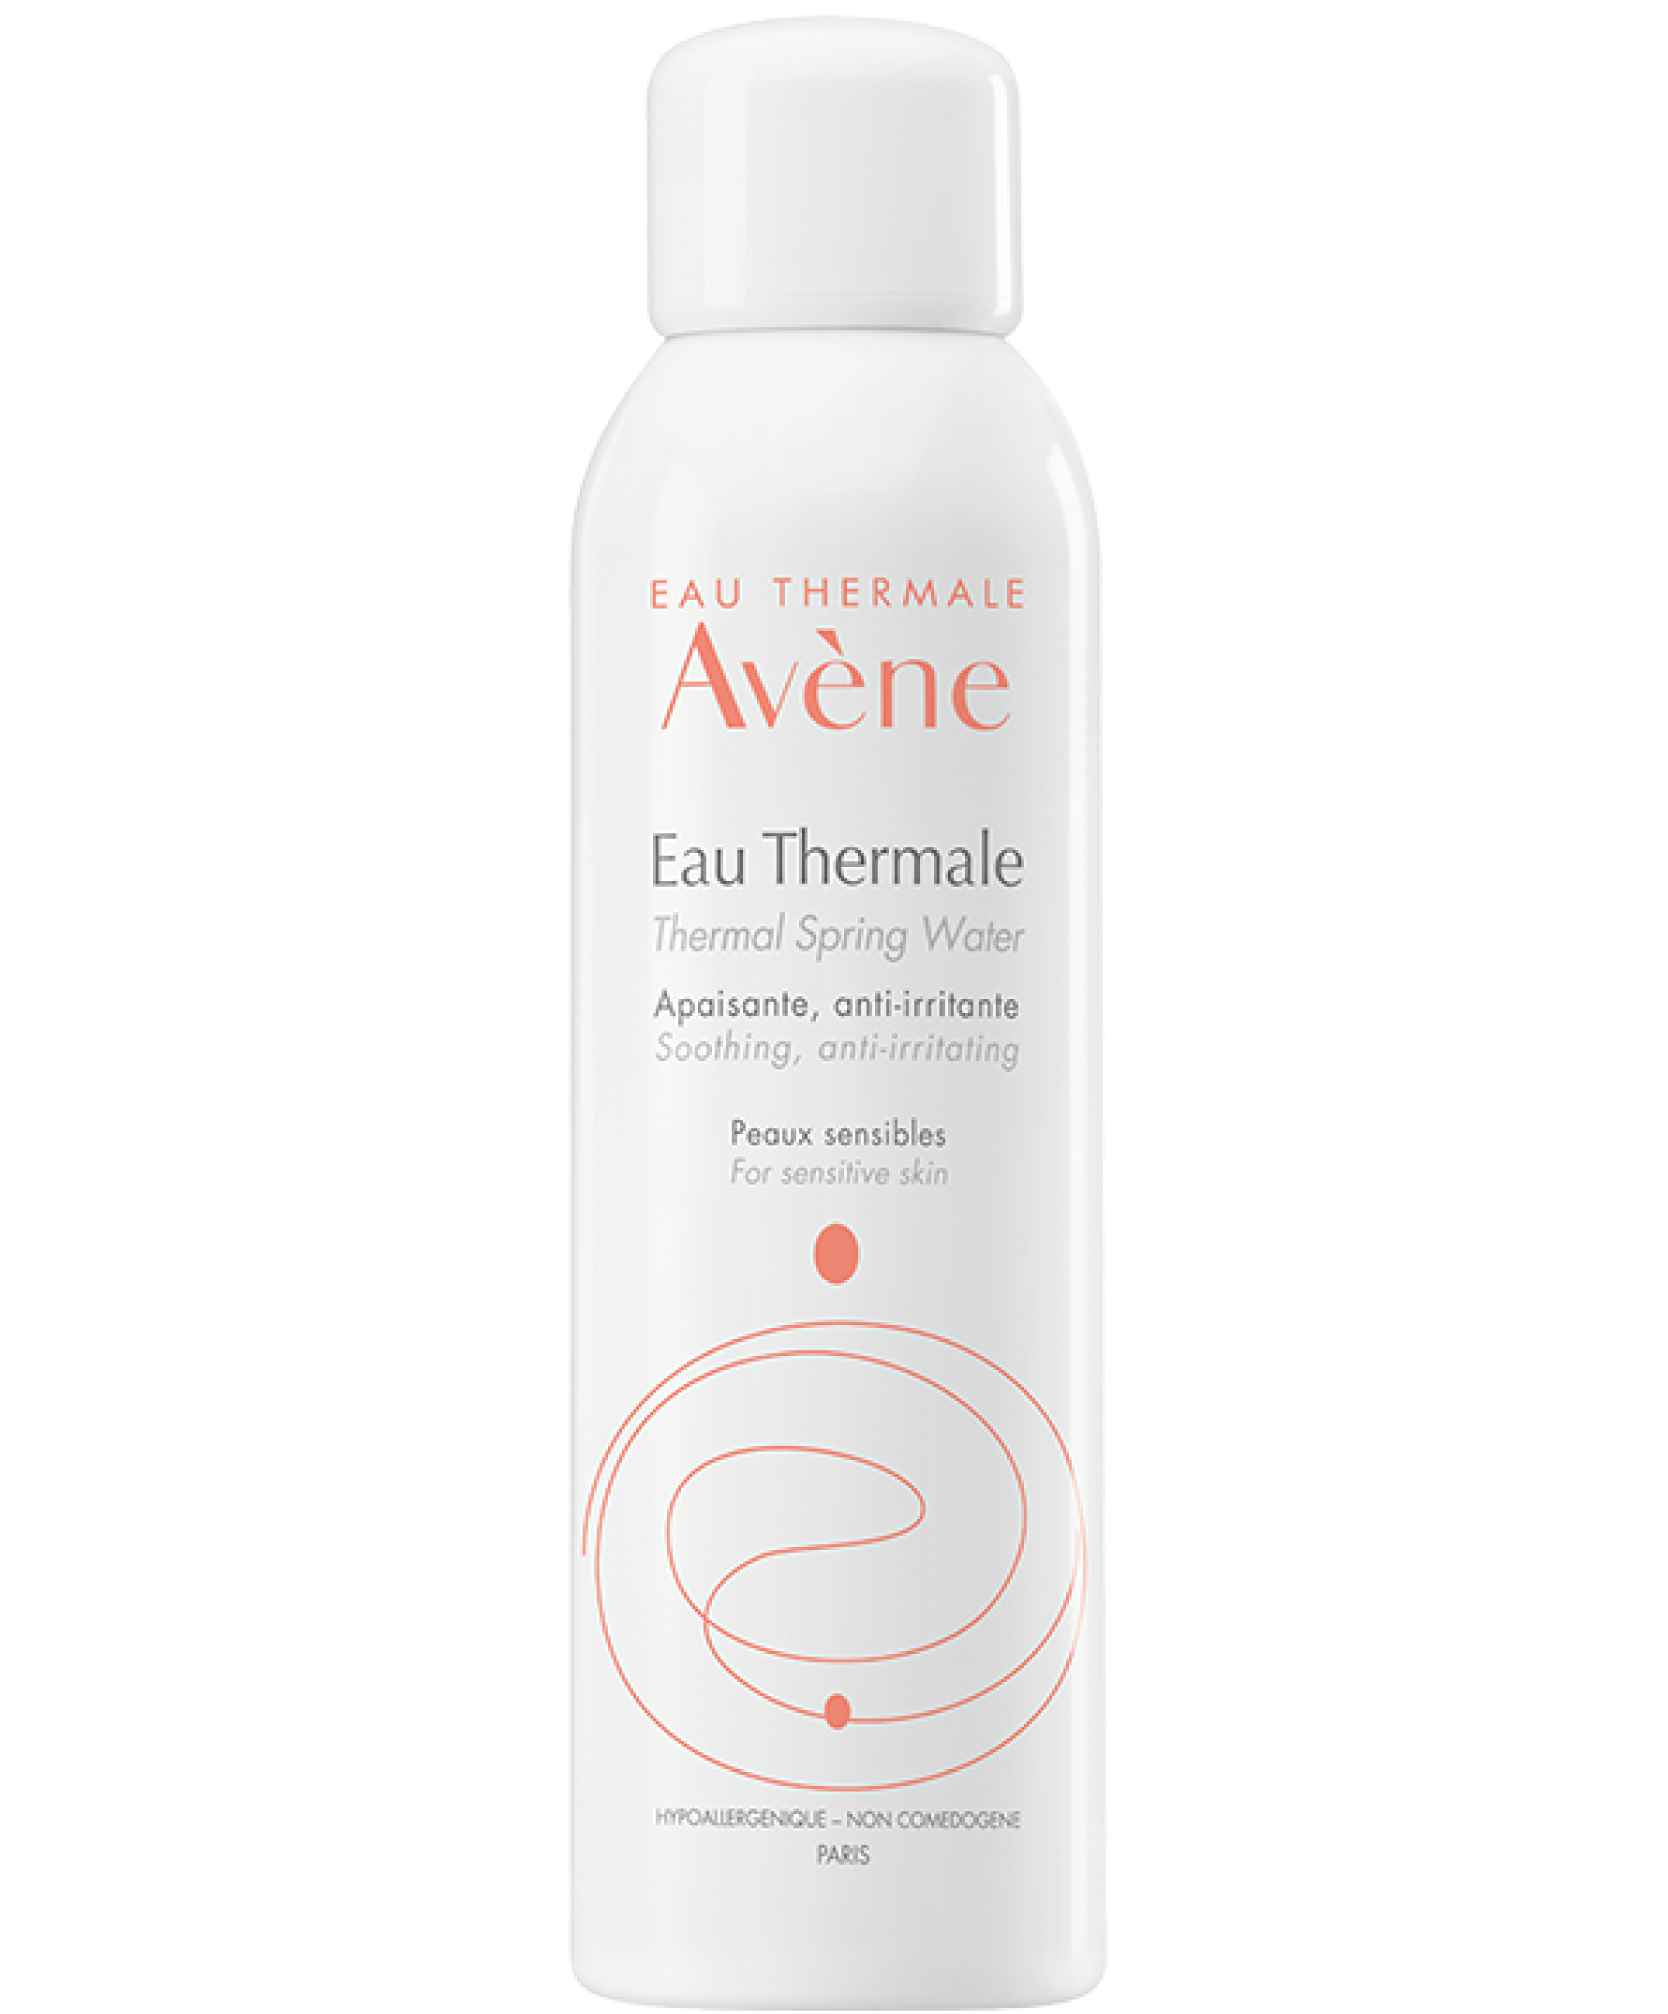 https://static.eau-thermale-avene.com/sites/files-za/images/products/website_visuals-05.png